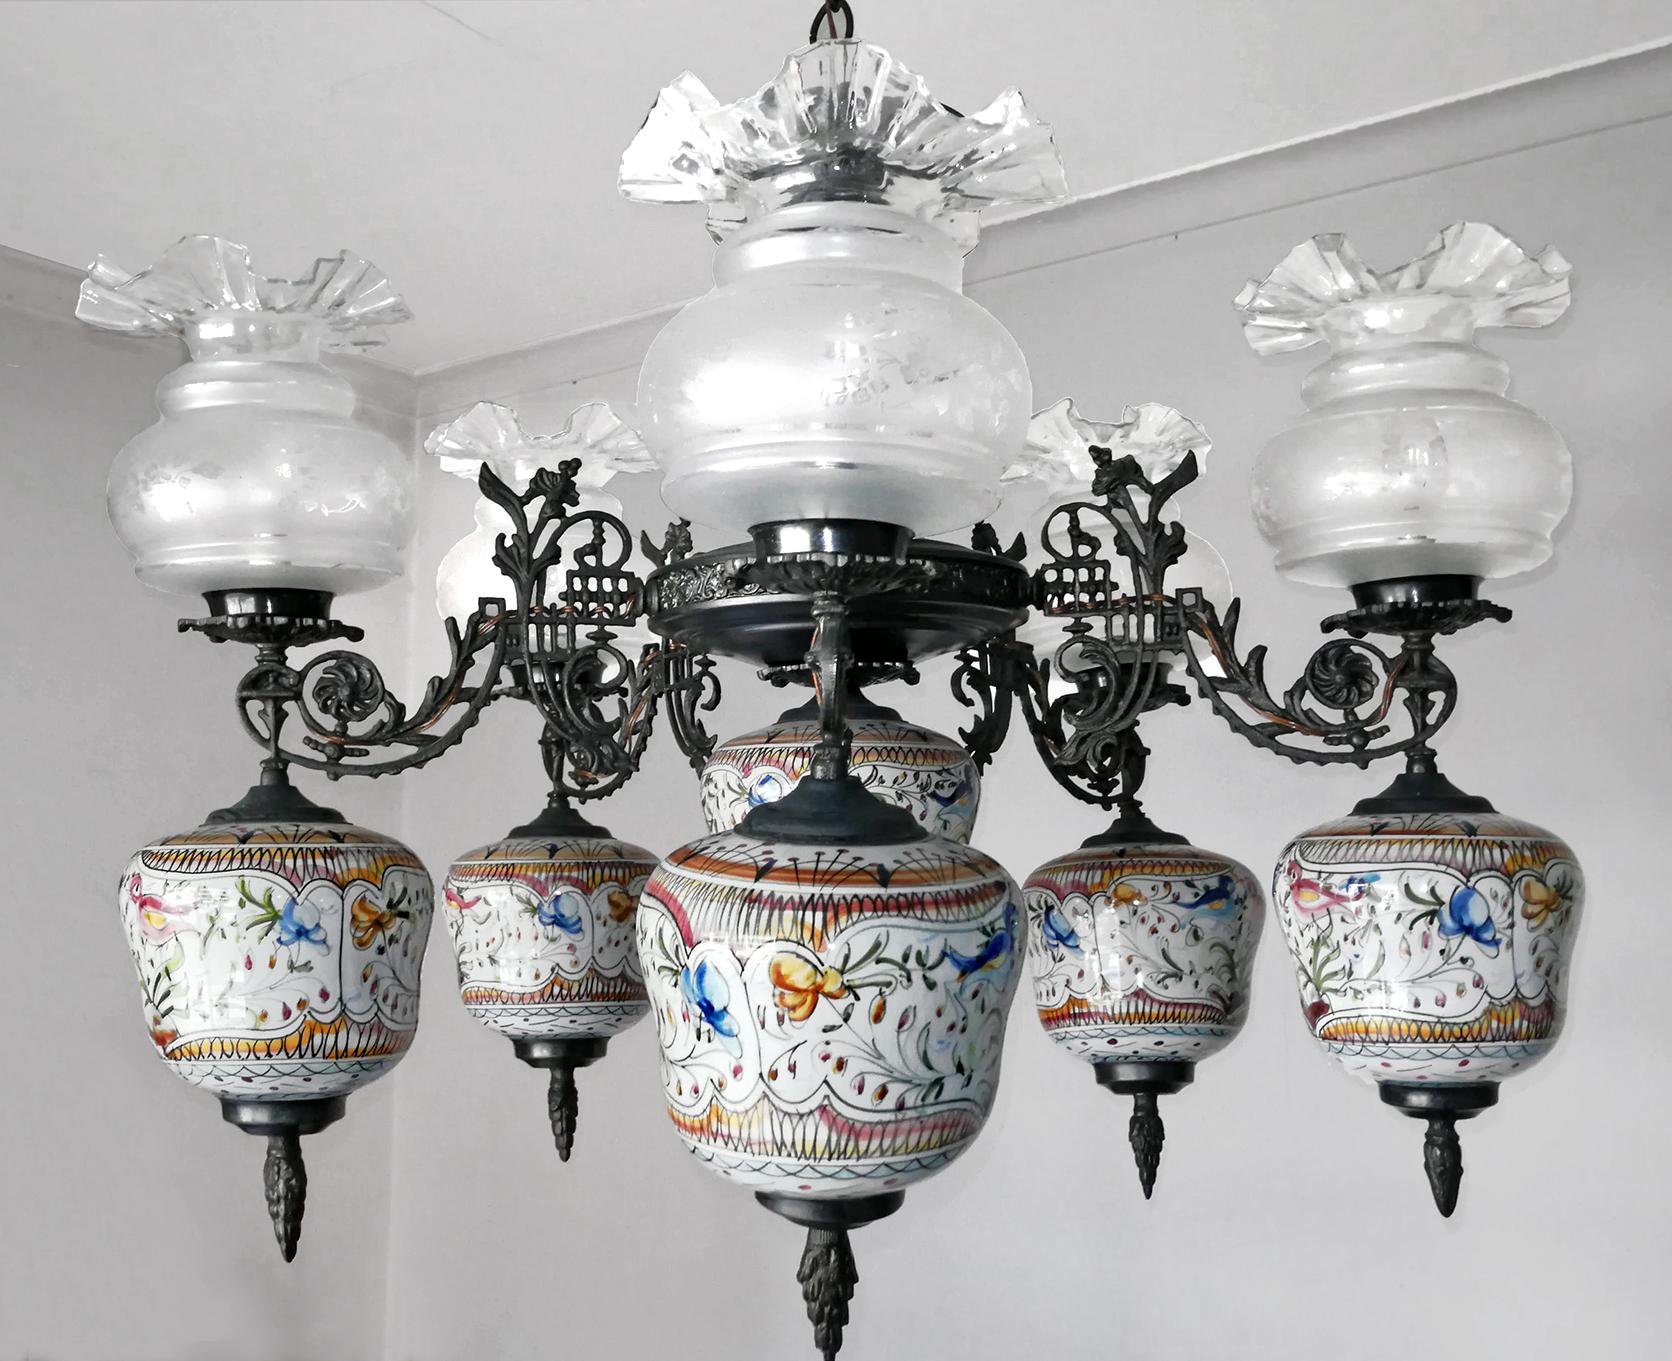 Art Deco delft painted in polychrome colors hand painted oil lamp chandelier in the 17th century style.
Measures:
Width 27.56 in / 70 cm
Height 80.70 in (Chain - 19.68 in)/ 105 cm (Chain - 50 cm)
5-light bulbs E 14 / good working